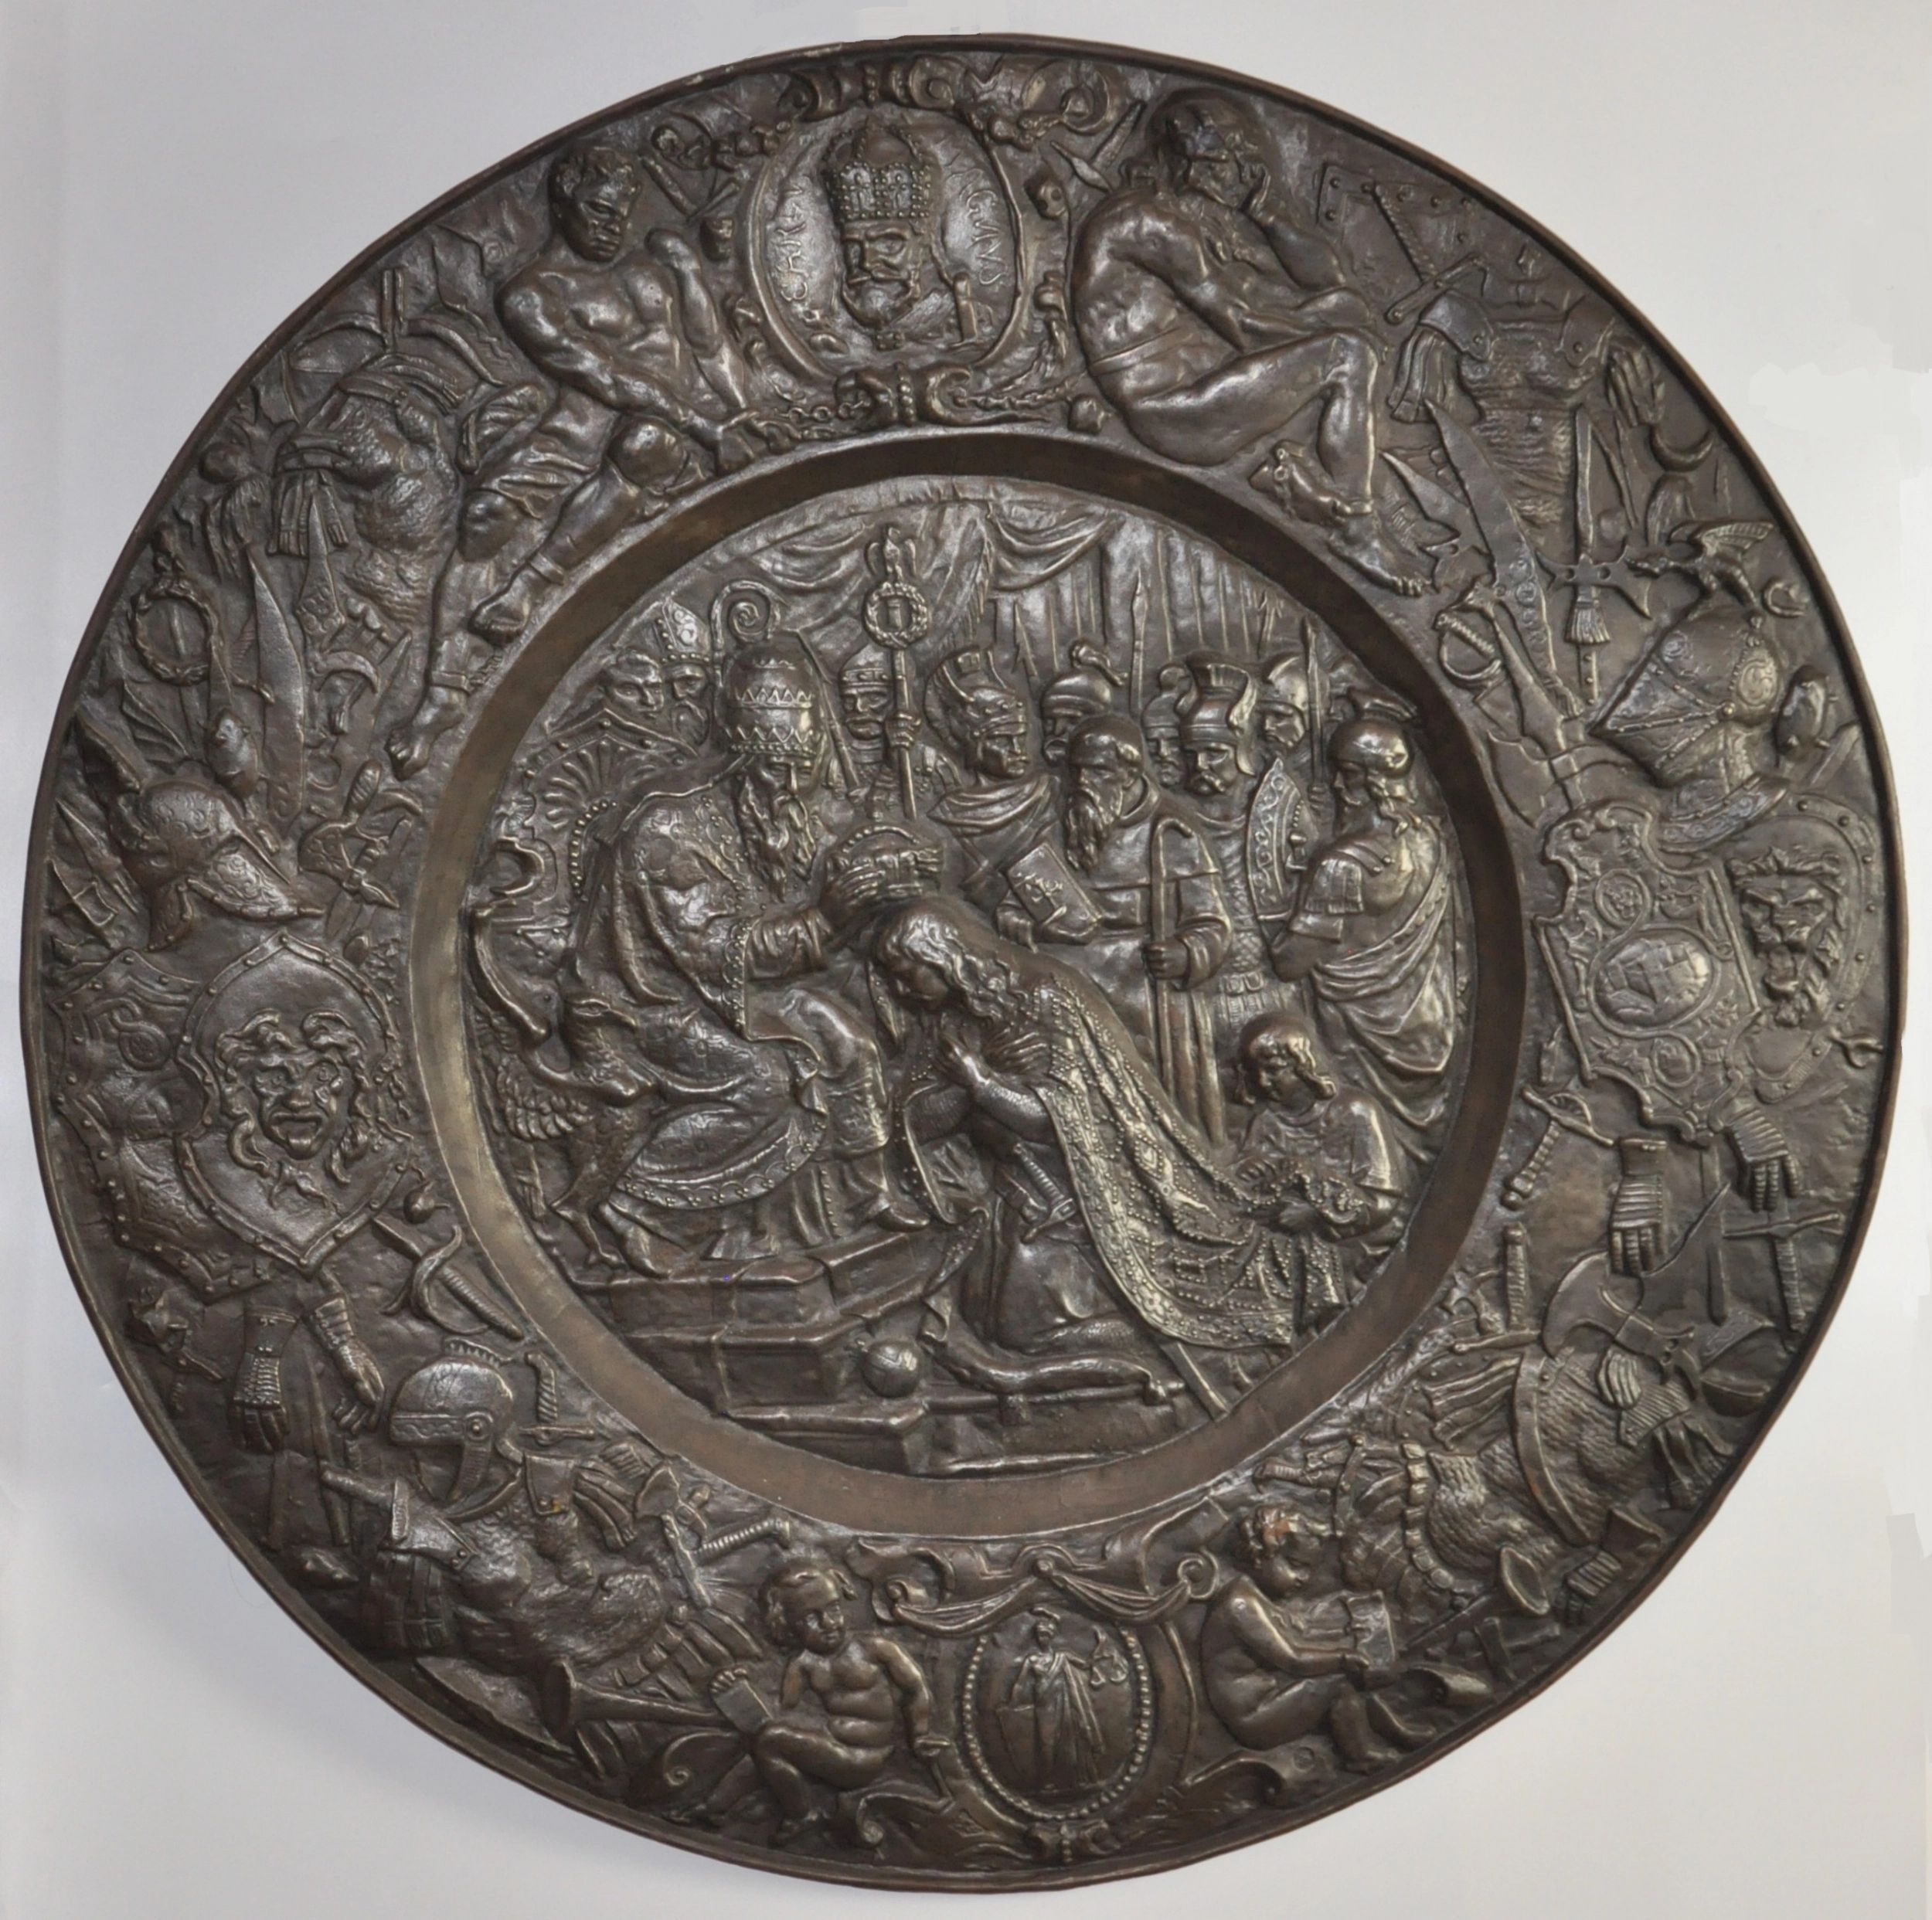 The-cast-iron-panel-The-Coronation-of-Charlemagne